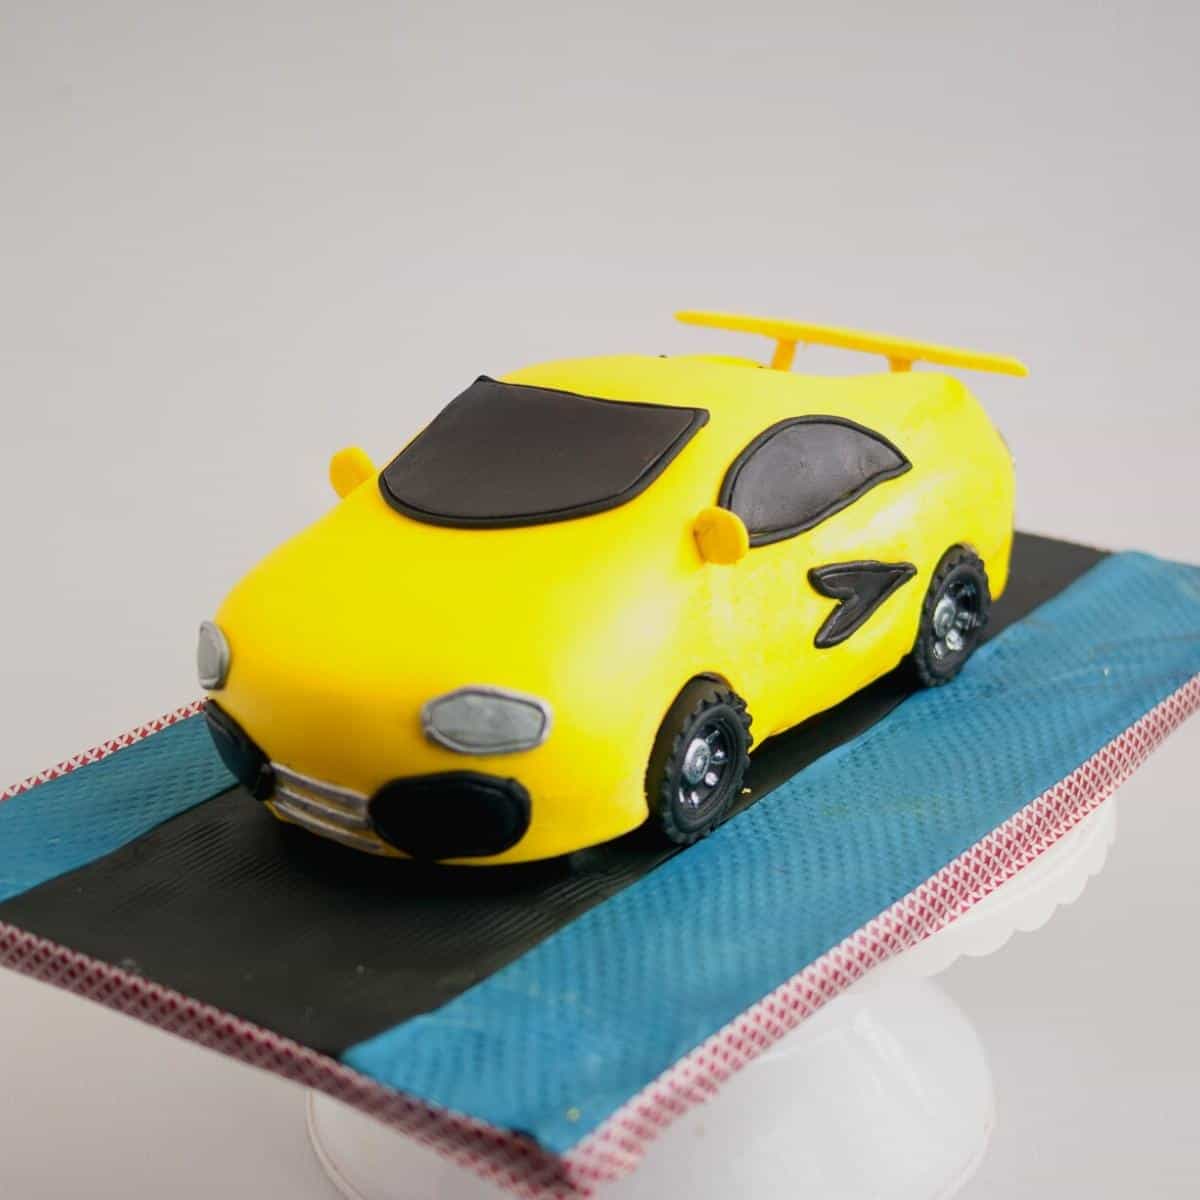 A cake board with a yellow car cake.